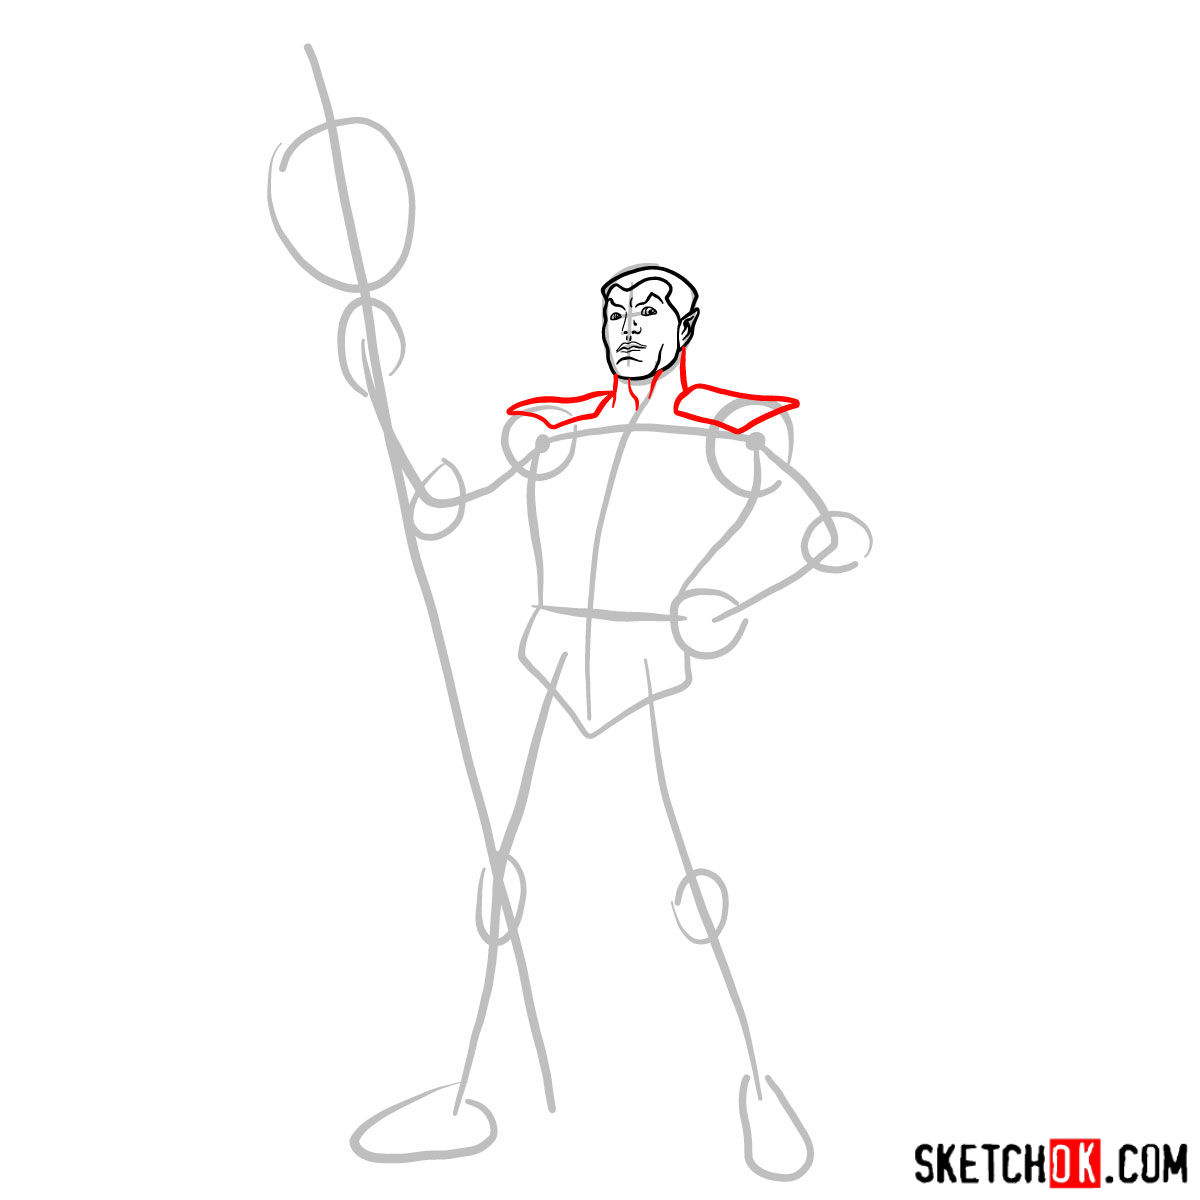 How to draw Namor the Sub-Mariner from Marvel Comics - step 04